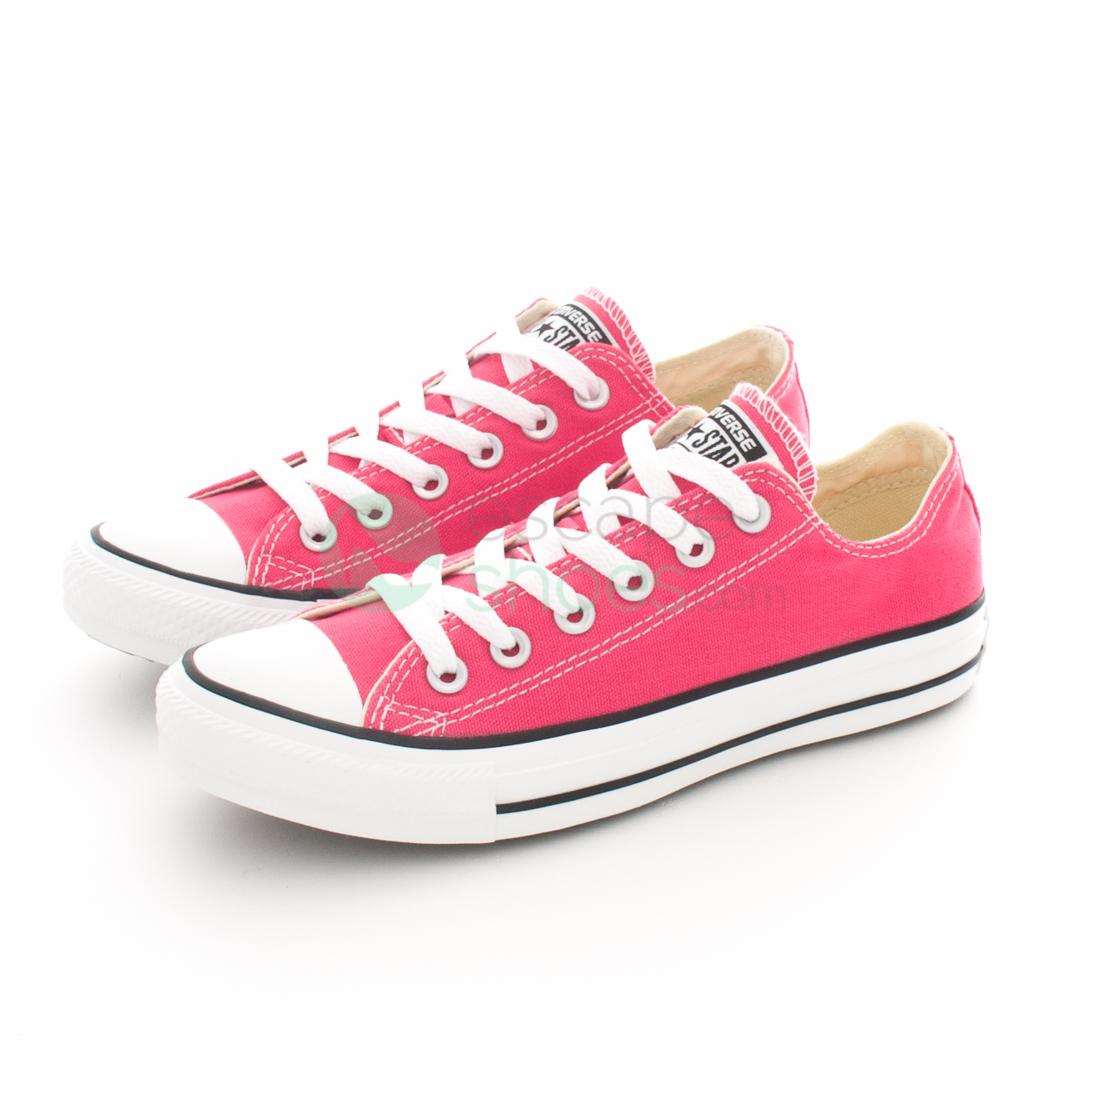 Sneakers CONVERSE Chuck Taylor Star 147141C 650 Paper